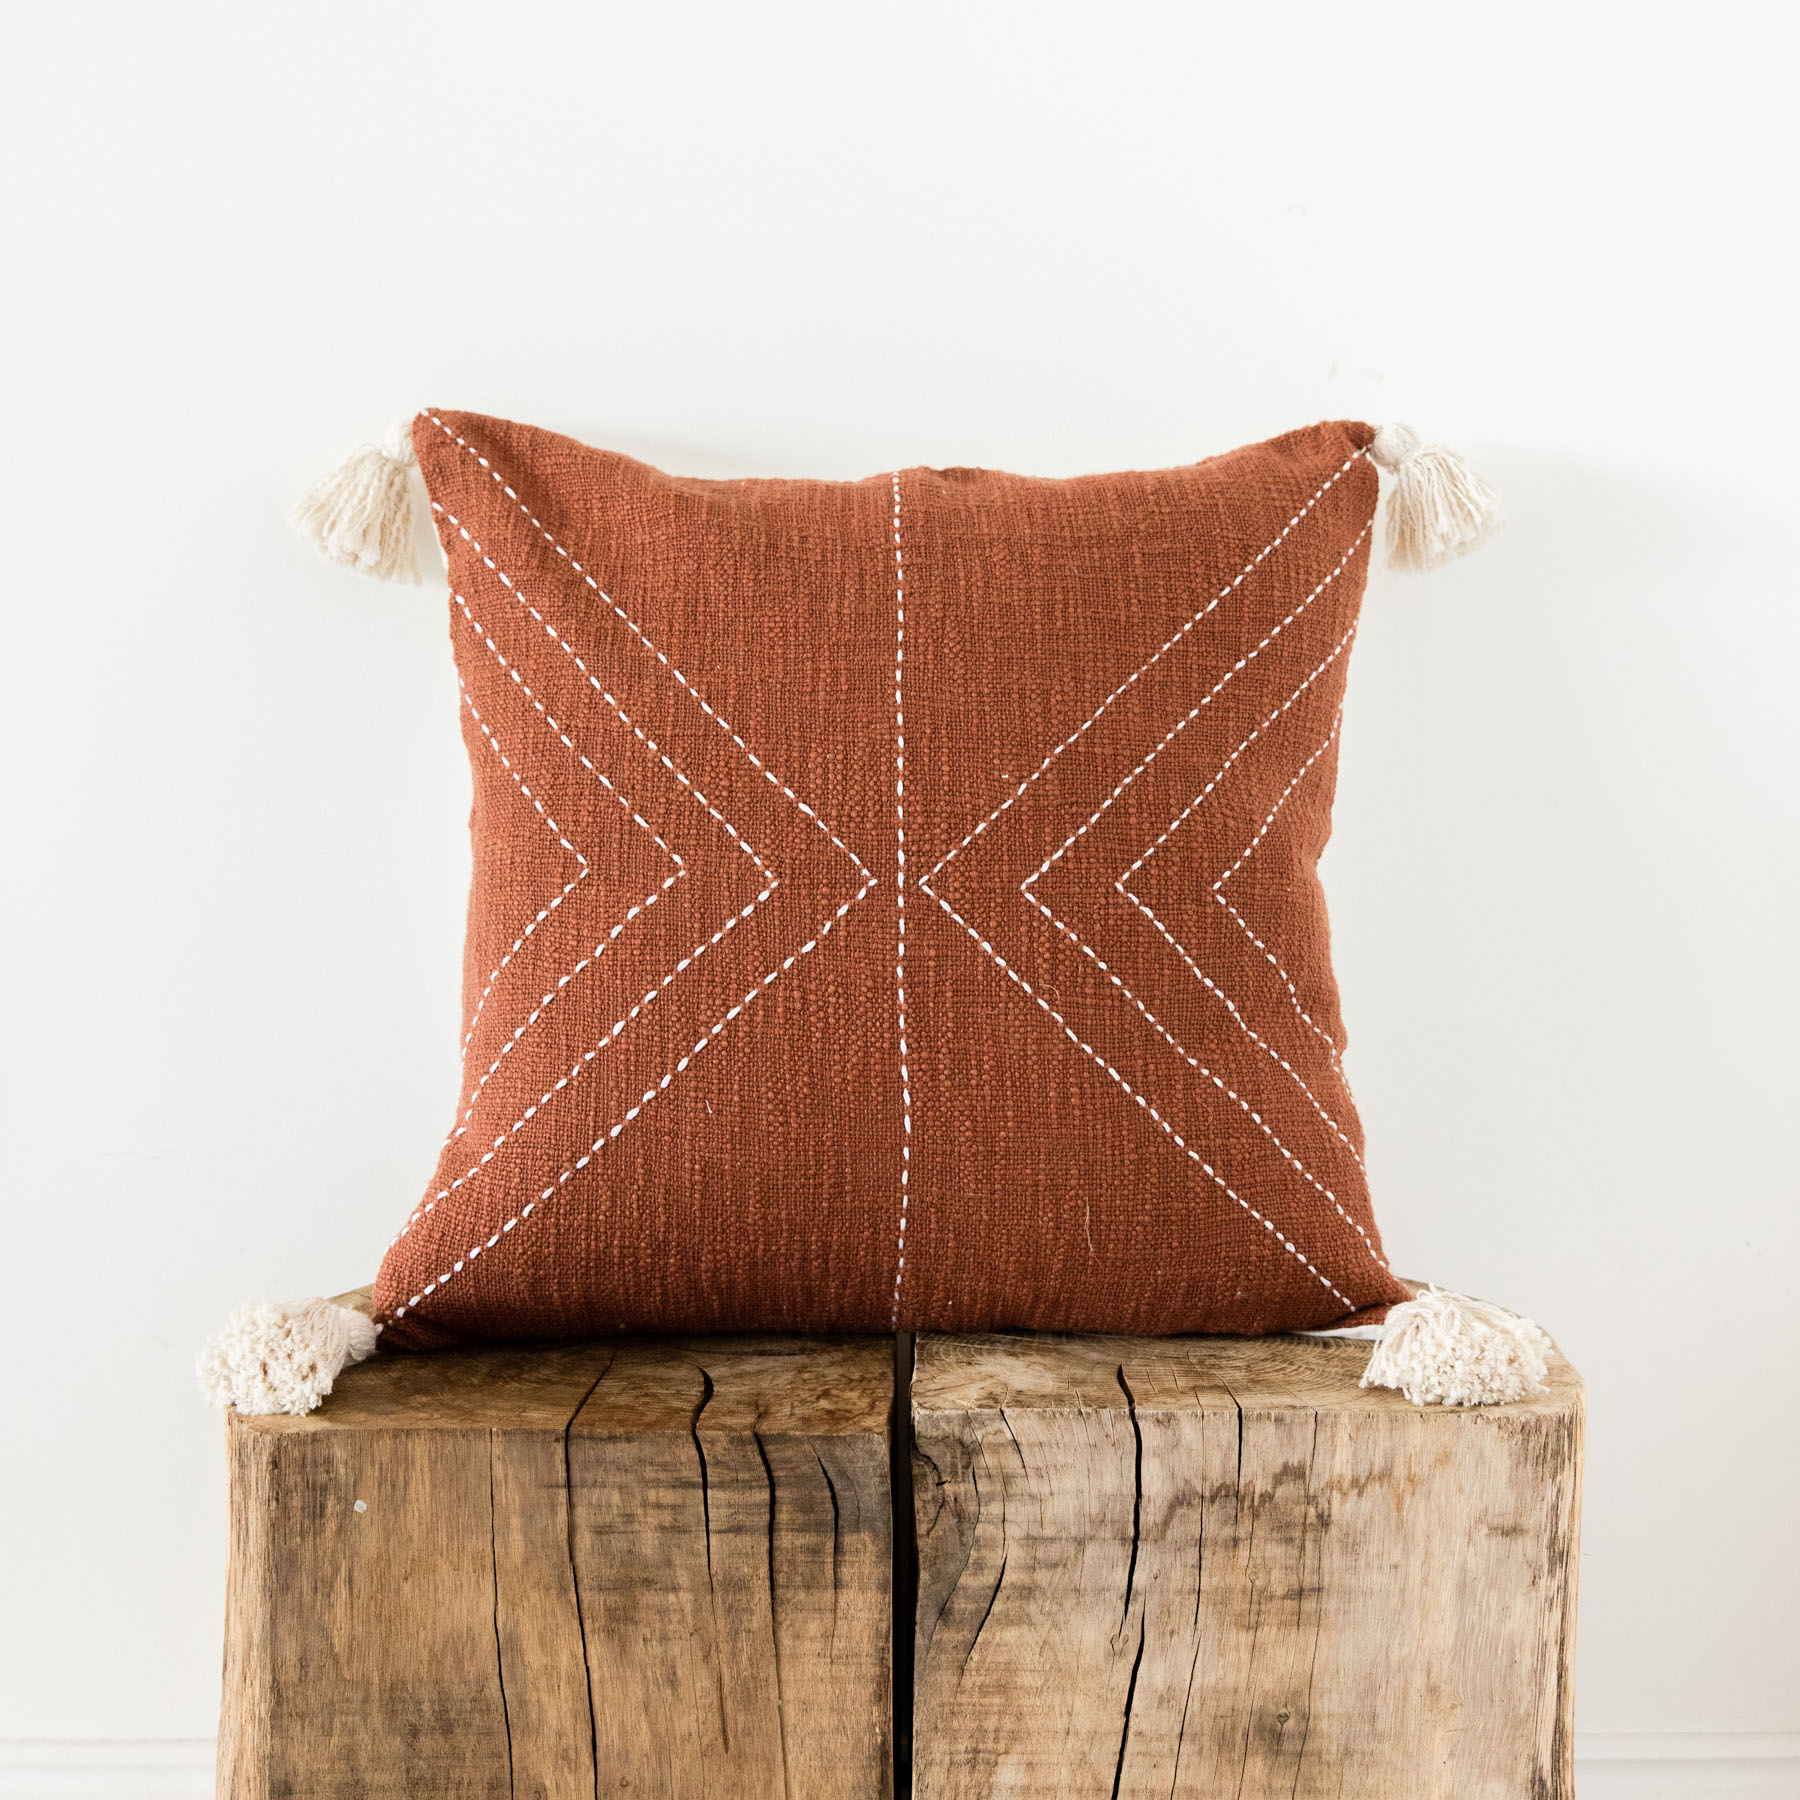 The Painted Bird Terracotta Cushion With Cream Stitched Pattern